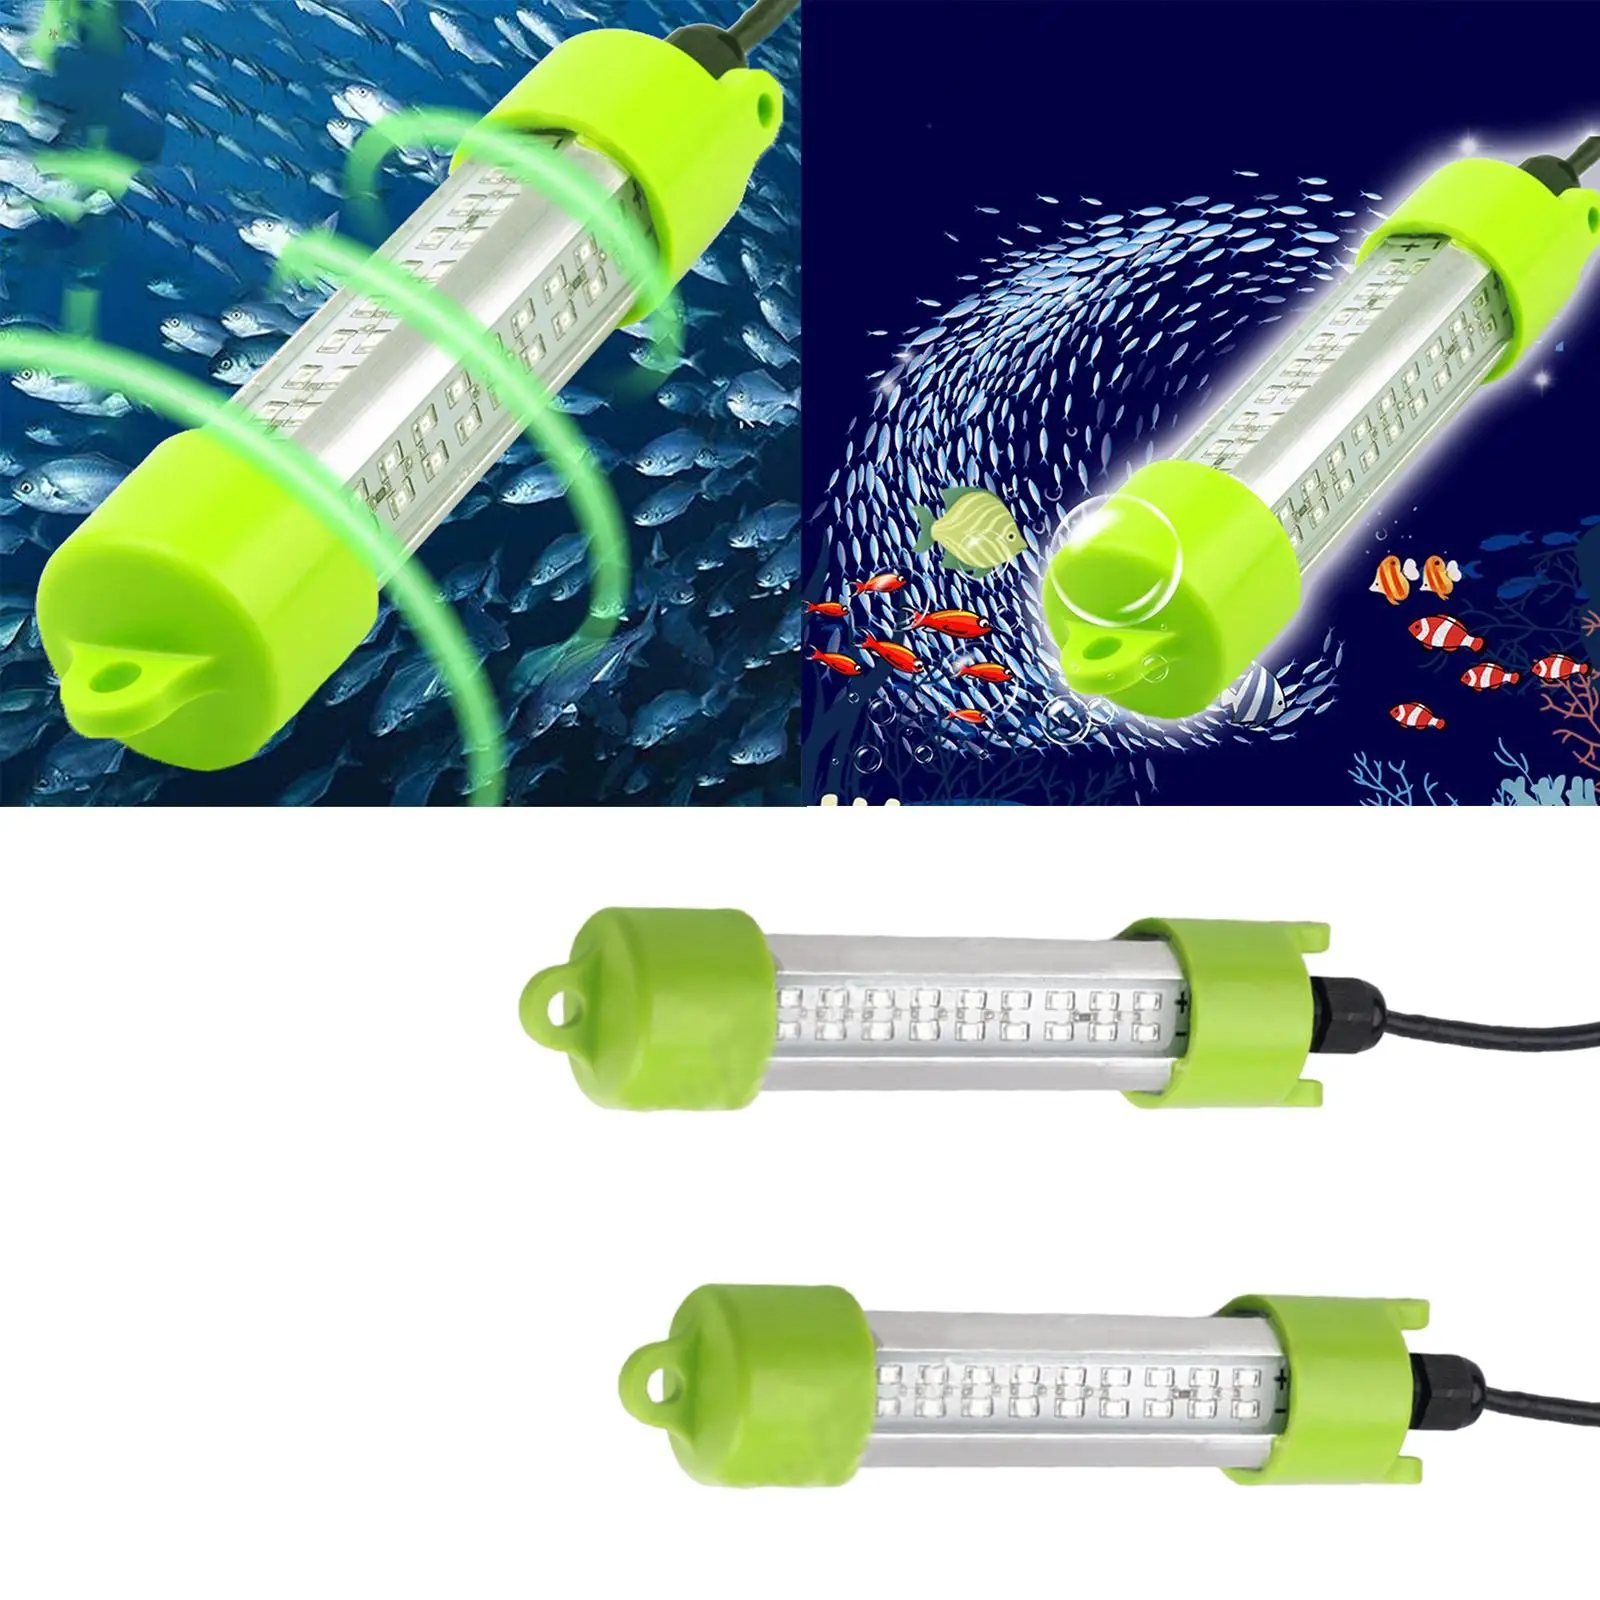 12V 45W Underwater Fishing Light Fish Finder Lamp Attract Waterproof Lures Bait Squid Shrimp Light with 7.5m Cord